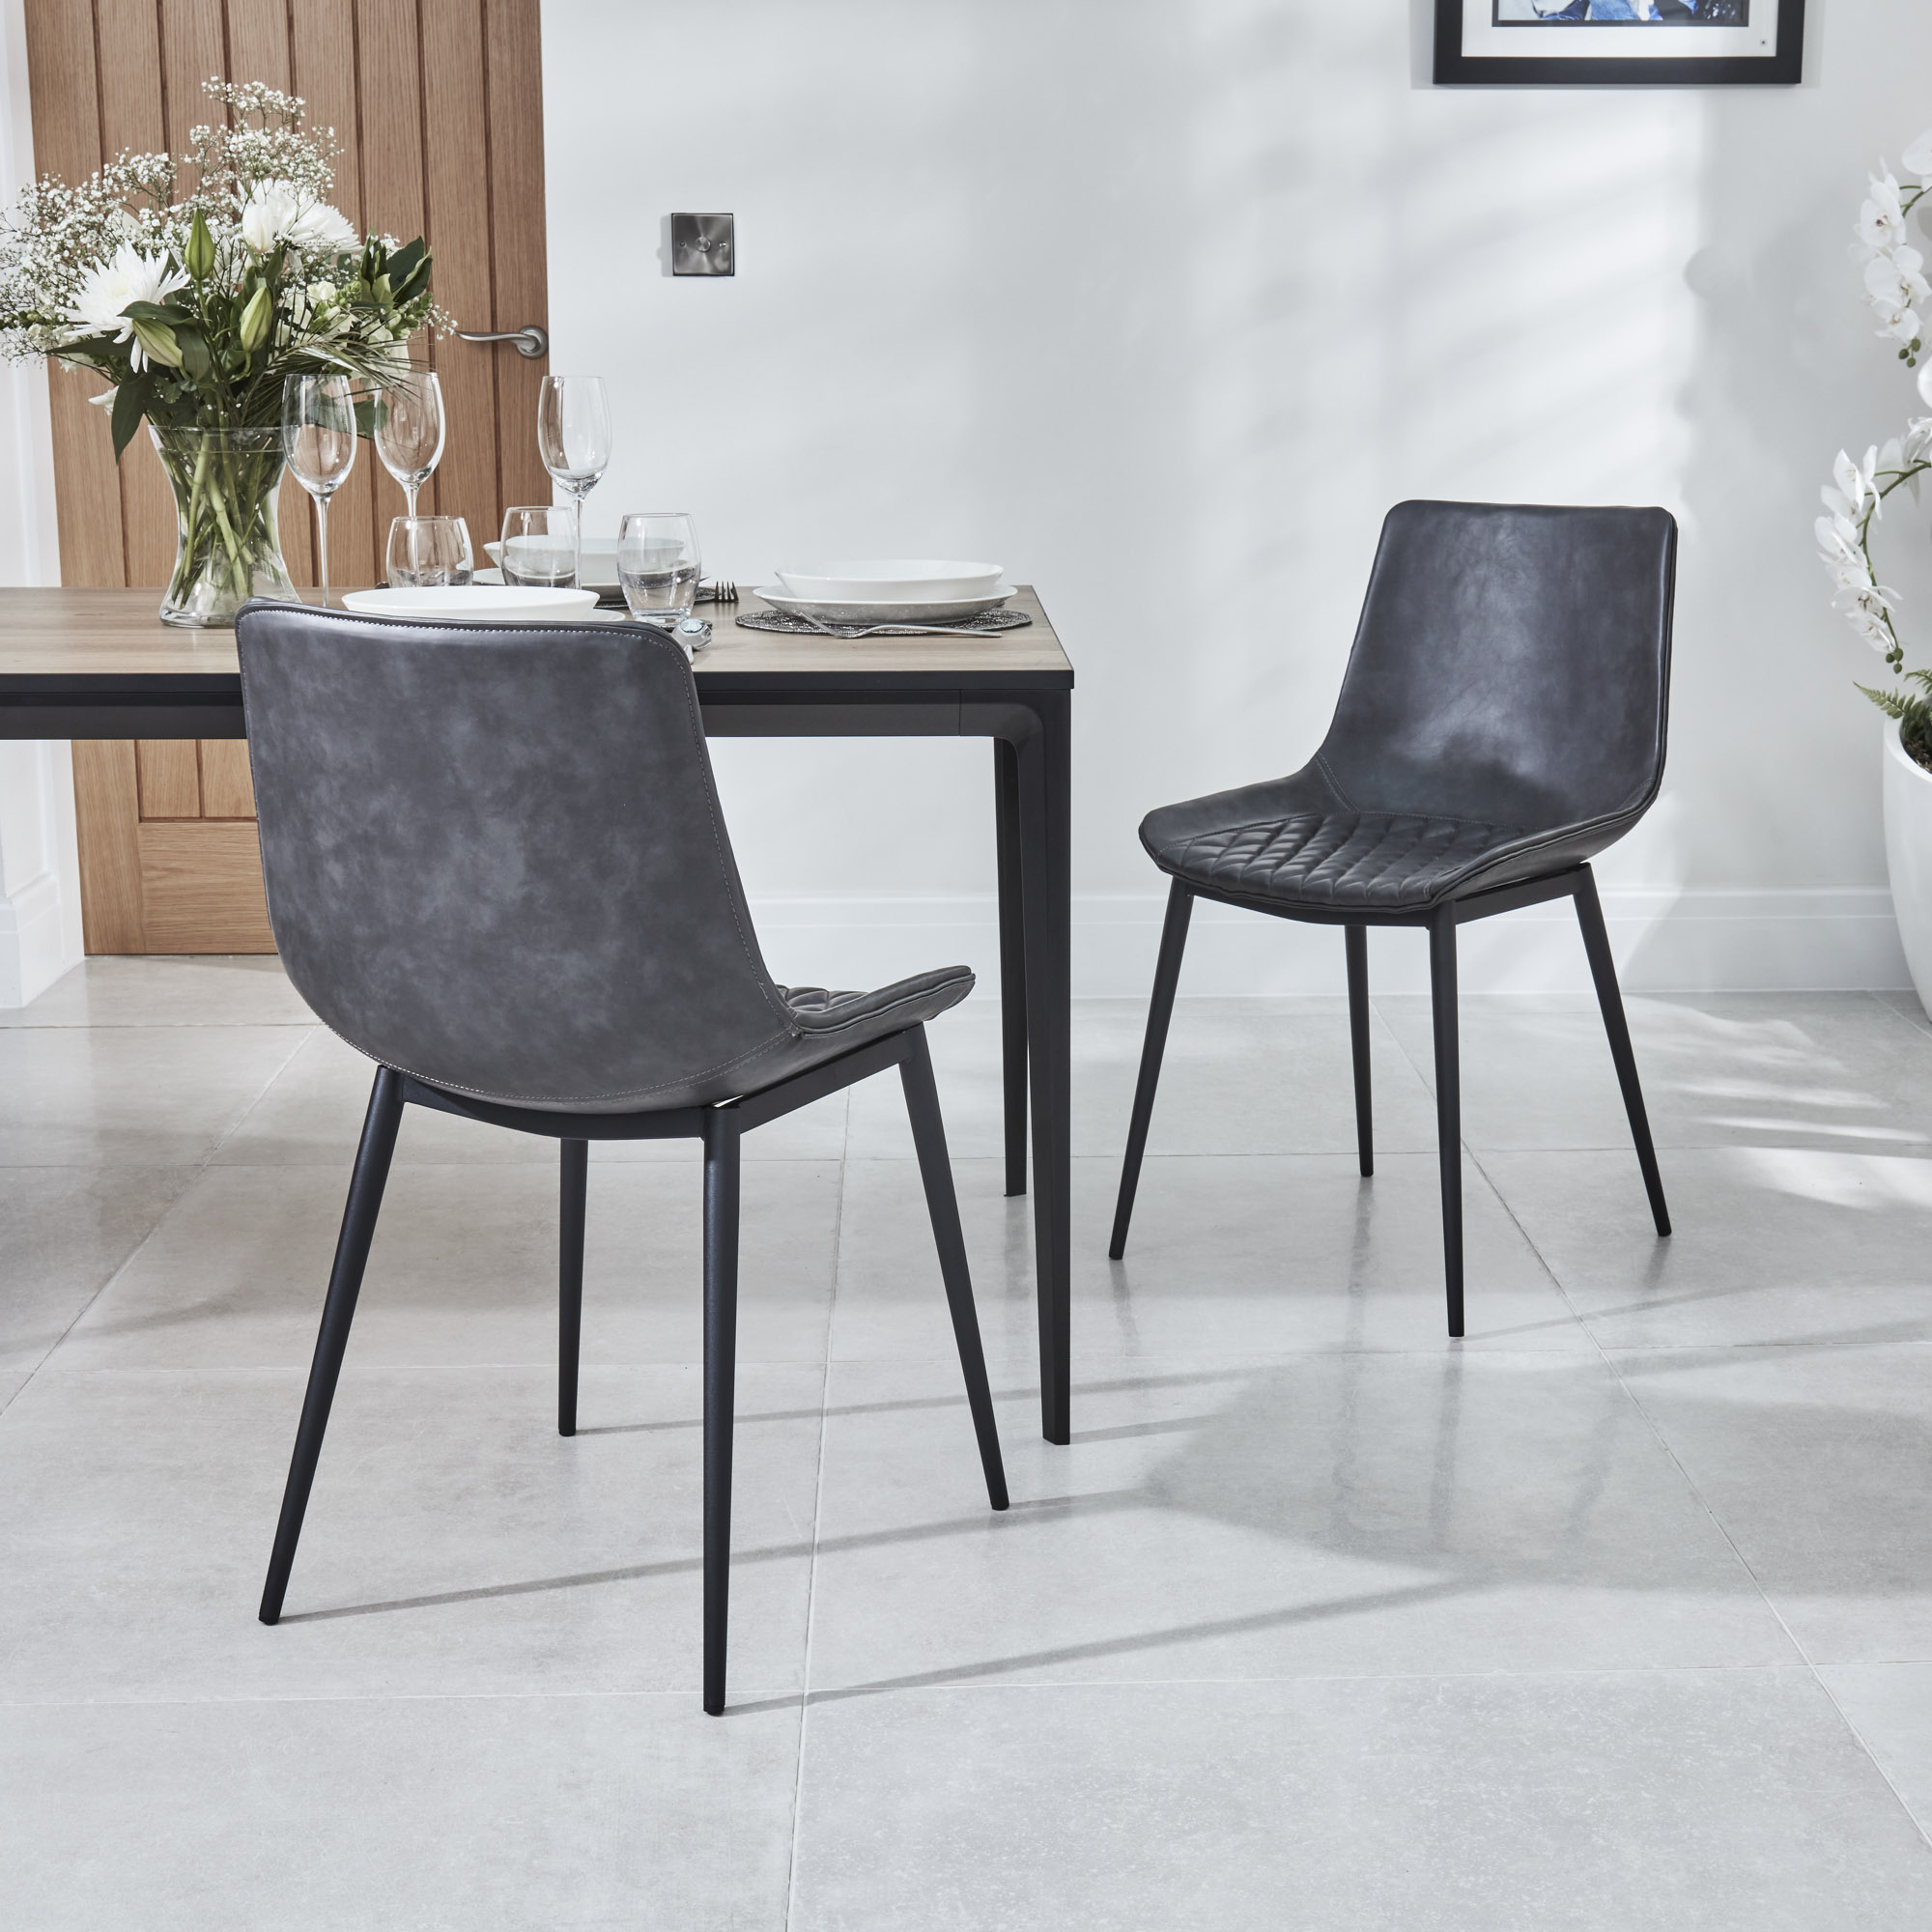 Bellagio 1.6M Natural Oak Melamine Dining Table with 4x Leo Grey Dining Chairs